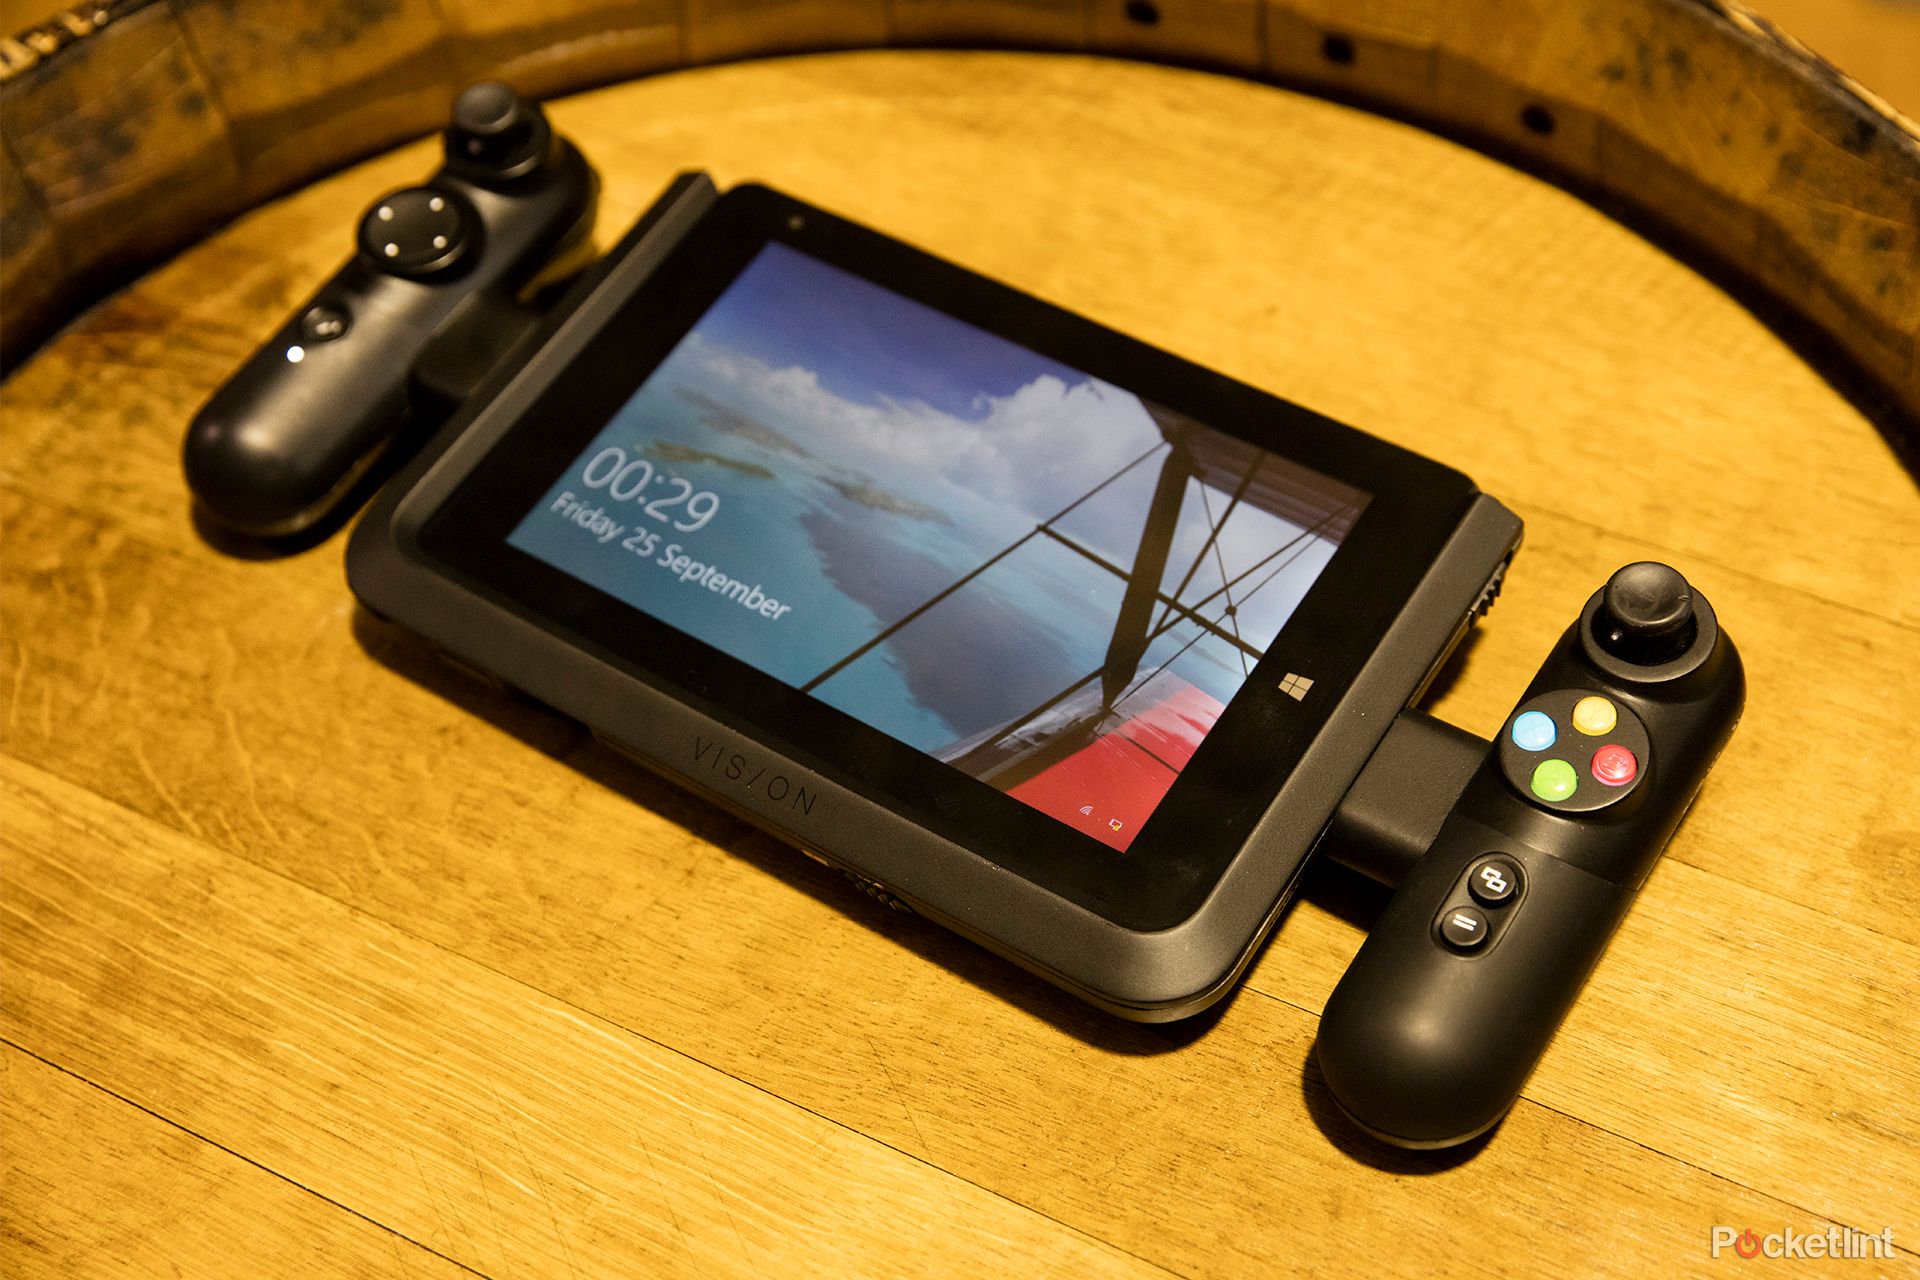 best windows 10 tablet for playing xbox one the linx vision is a bargain at 149 image 1